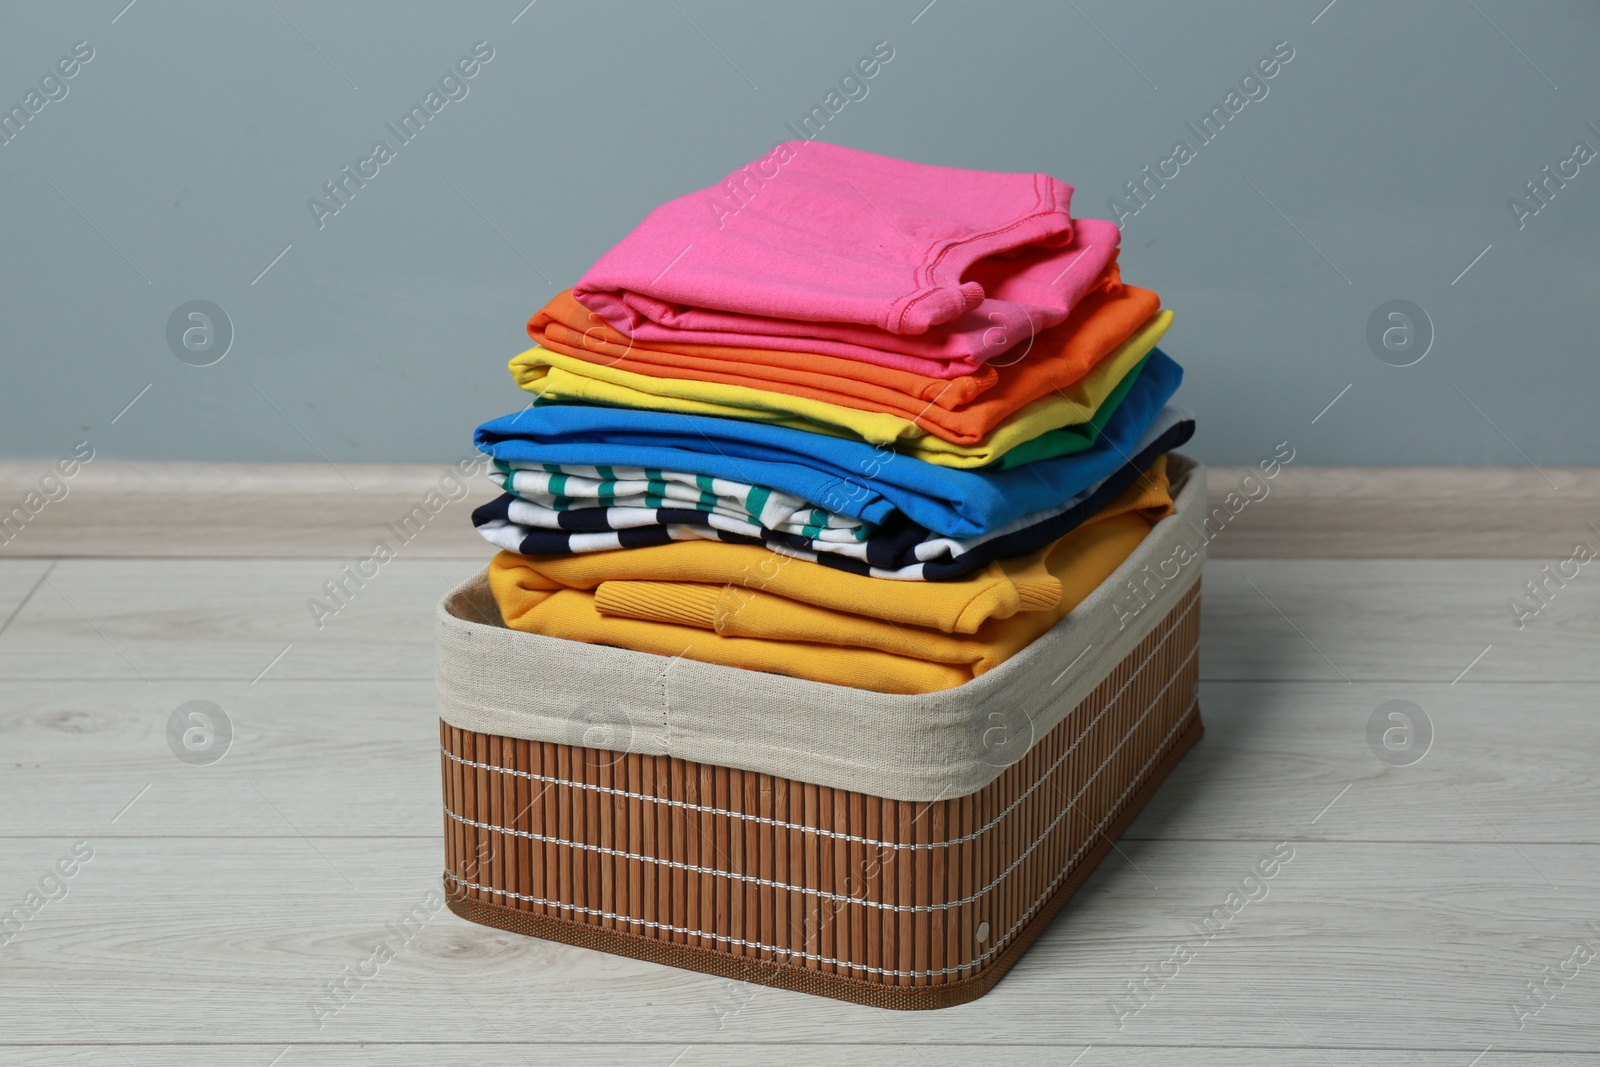 Photo of Laundry basket with clean stacked clothes on floor near grey wall